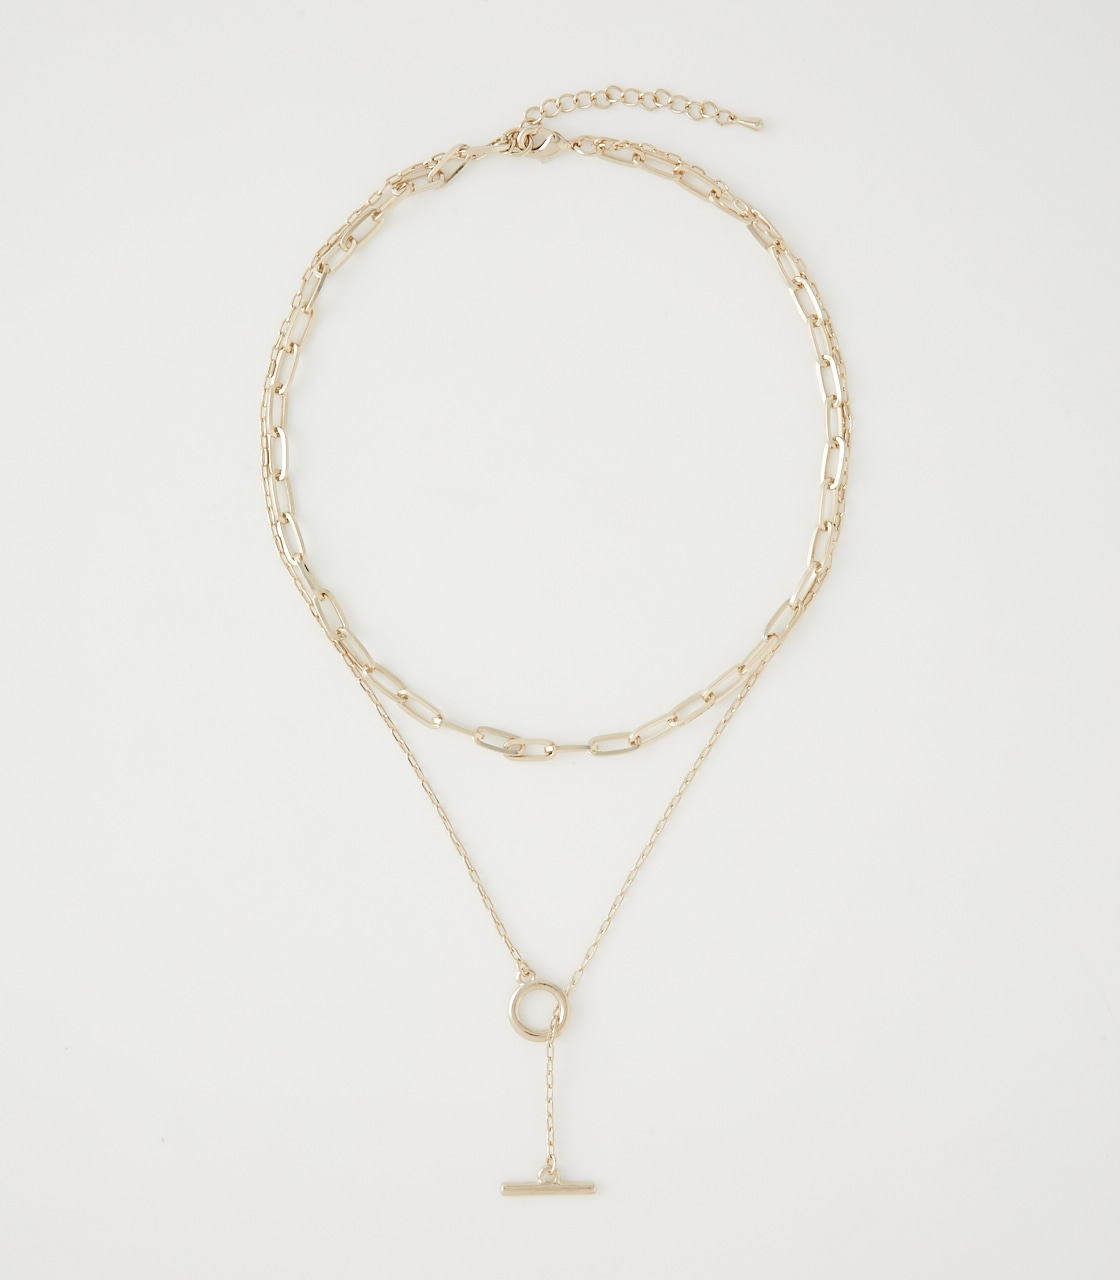 WIDE CHAIN DOUBLE NECKLACE/ワイドチェーンダブルネックレス 詳細画像 L/GLD 1